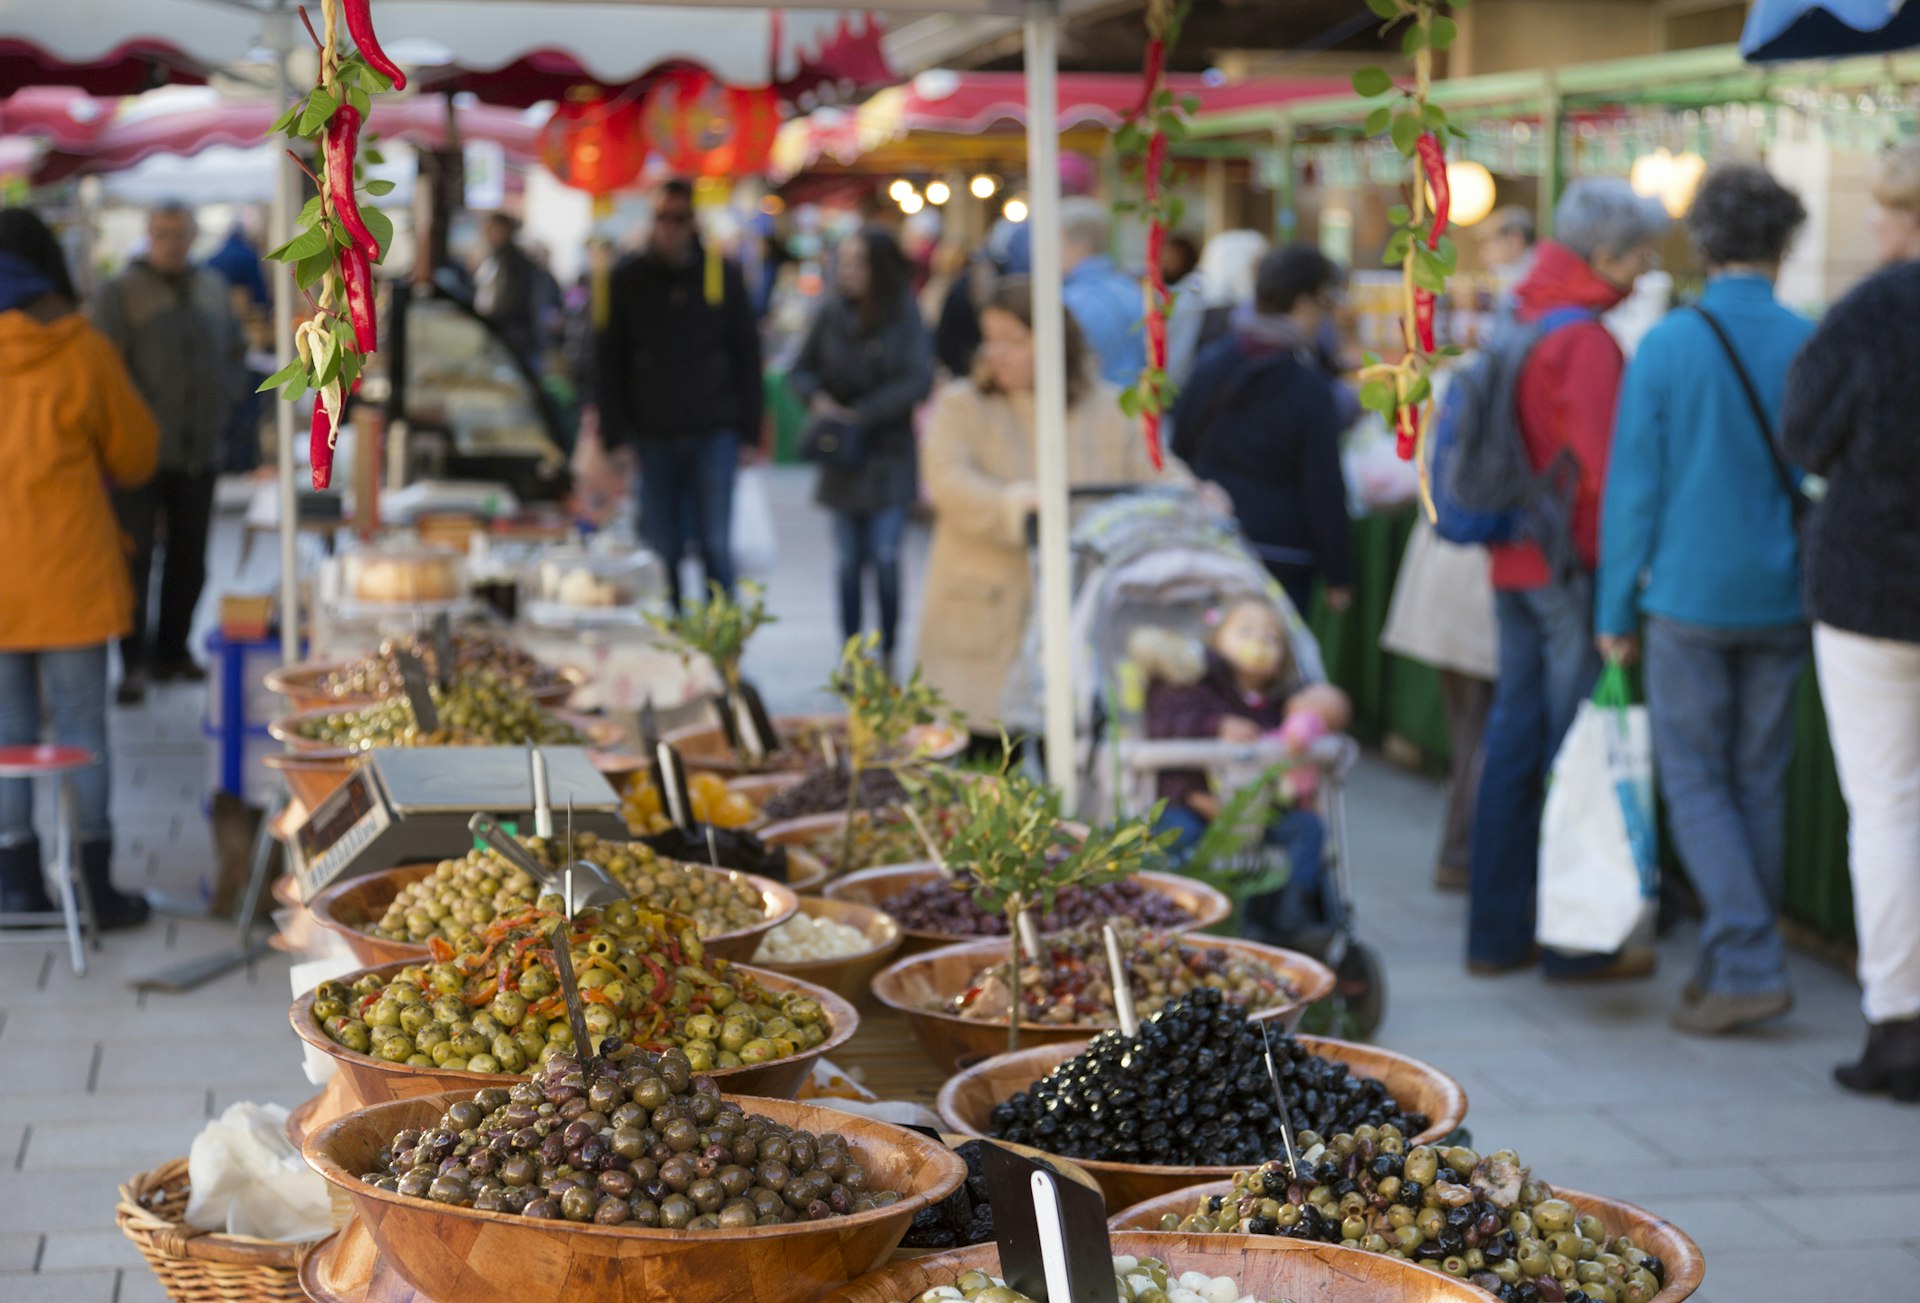 Olives in baskets for sale at the Saturday Market in Beaune, France with people milling about in the background